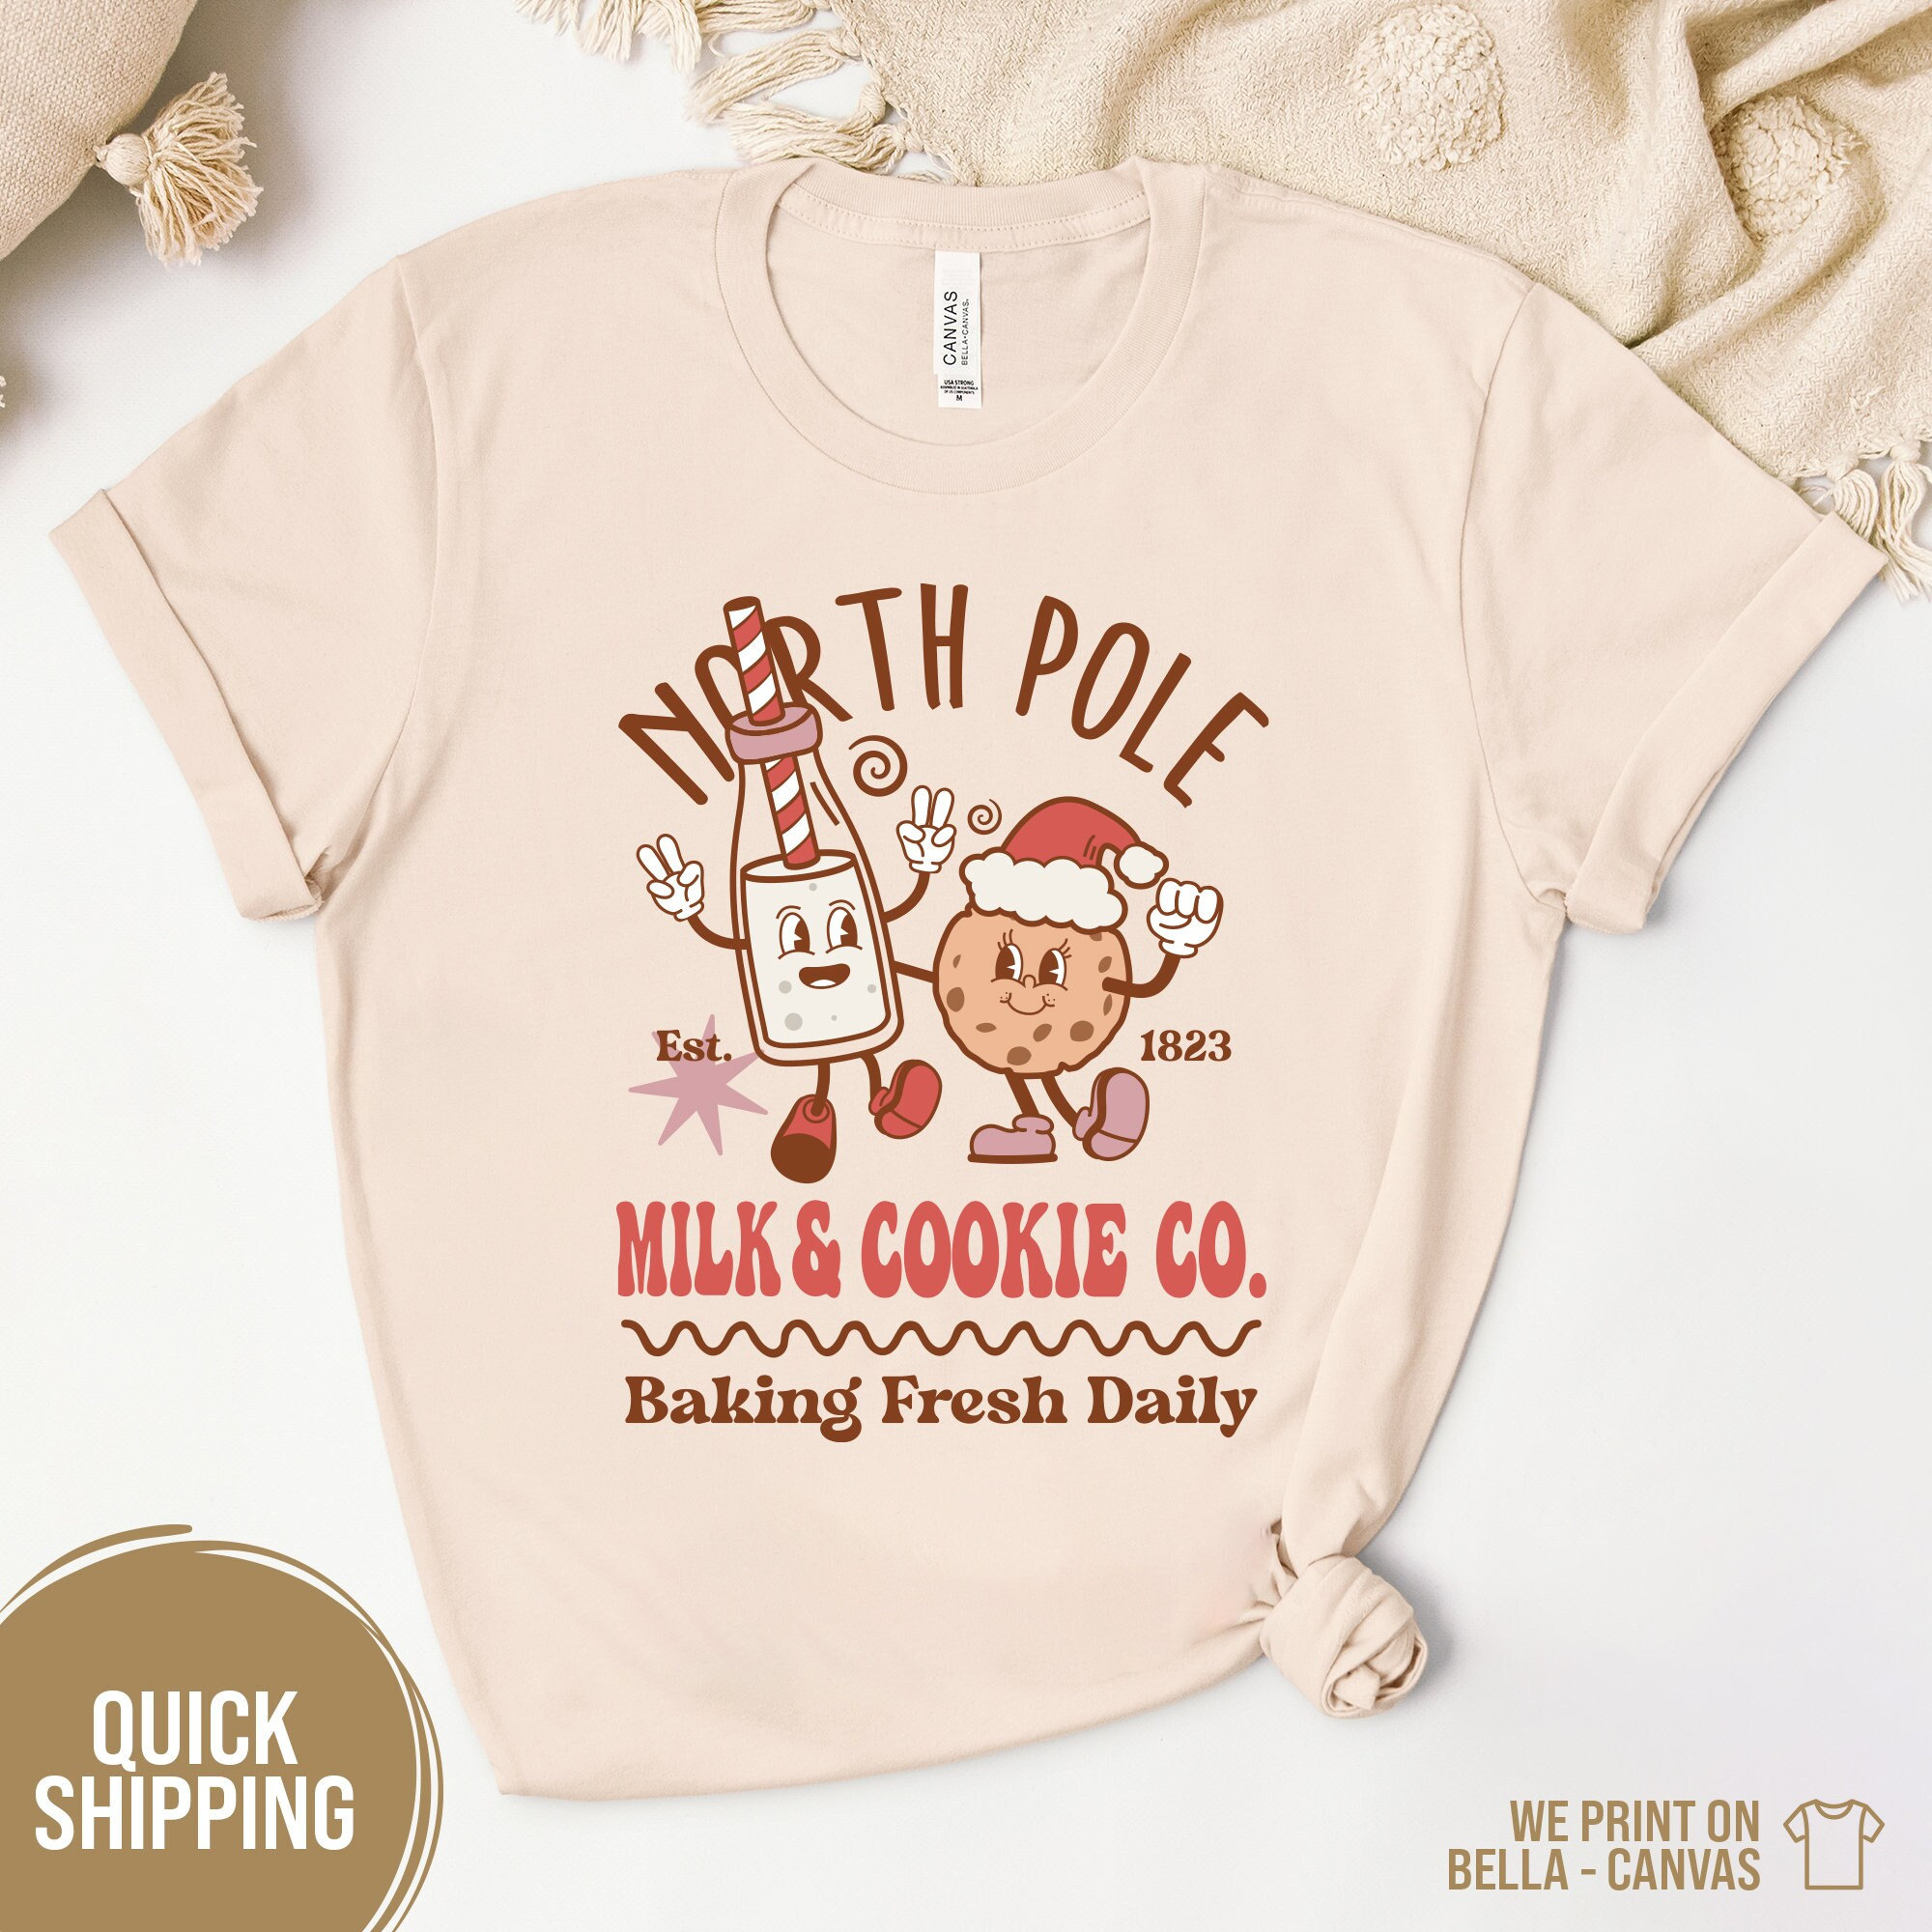 Festive Y2K Clothing: Cute Christmas Baking Shirt with North Pole Milk and Cookie Co Santa Design